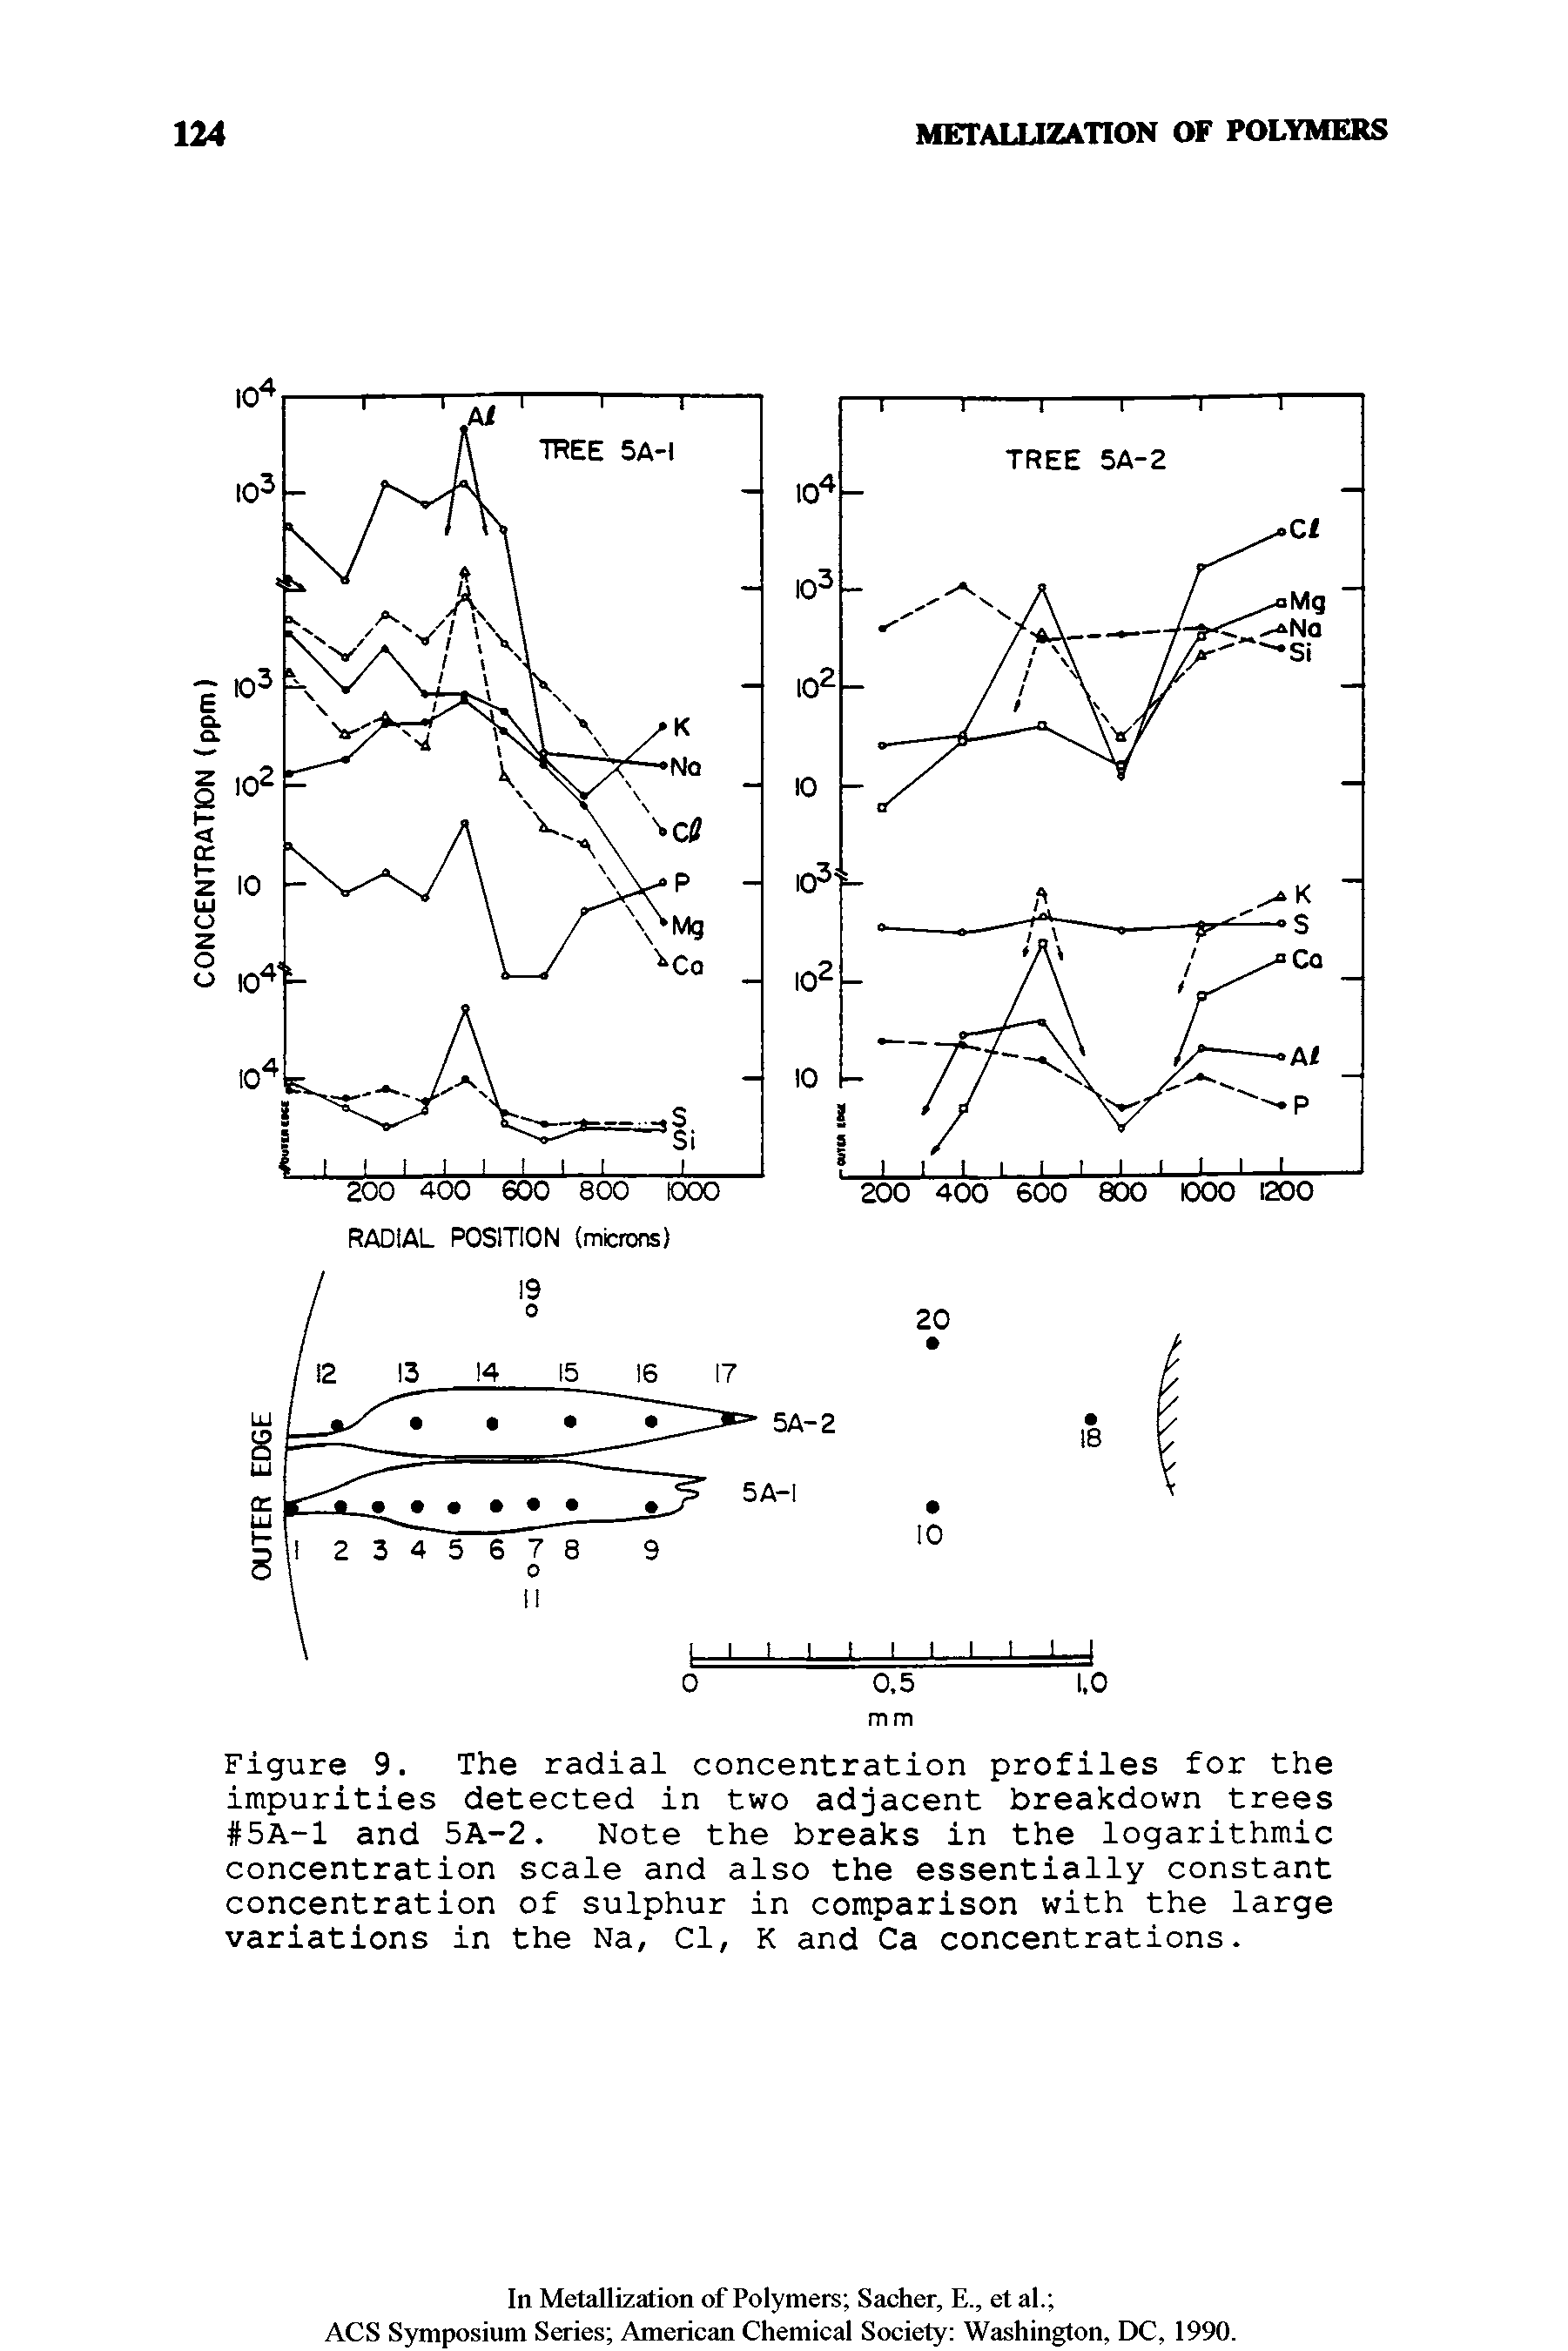 Figure 9. The radial concentration profiles for the impurities detected in two adjacent breakdown trees 5A-1 and 5A-2. Note the breaks in the logarithmic concentration scale and also the essentially constant concentration of sulphur in comparison with the large variations in the Na, Cl, K and Ca concentrations.